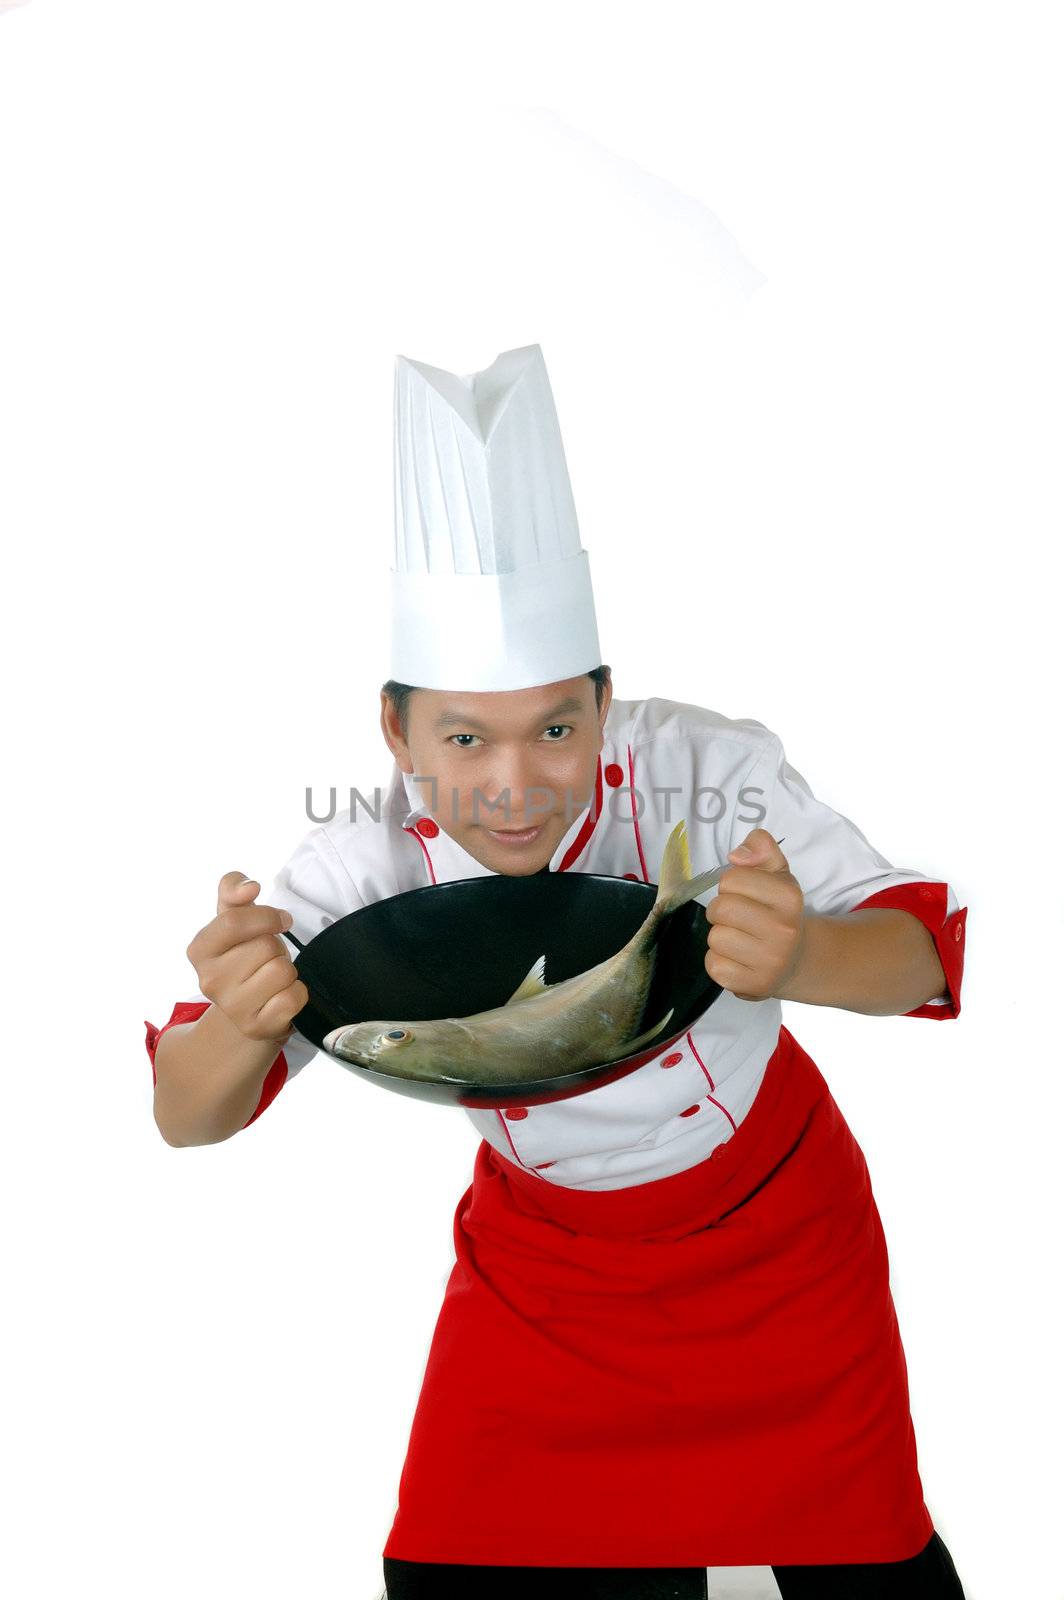 chef holding raw fish on a black frying pan isolated on white background